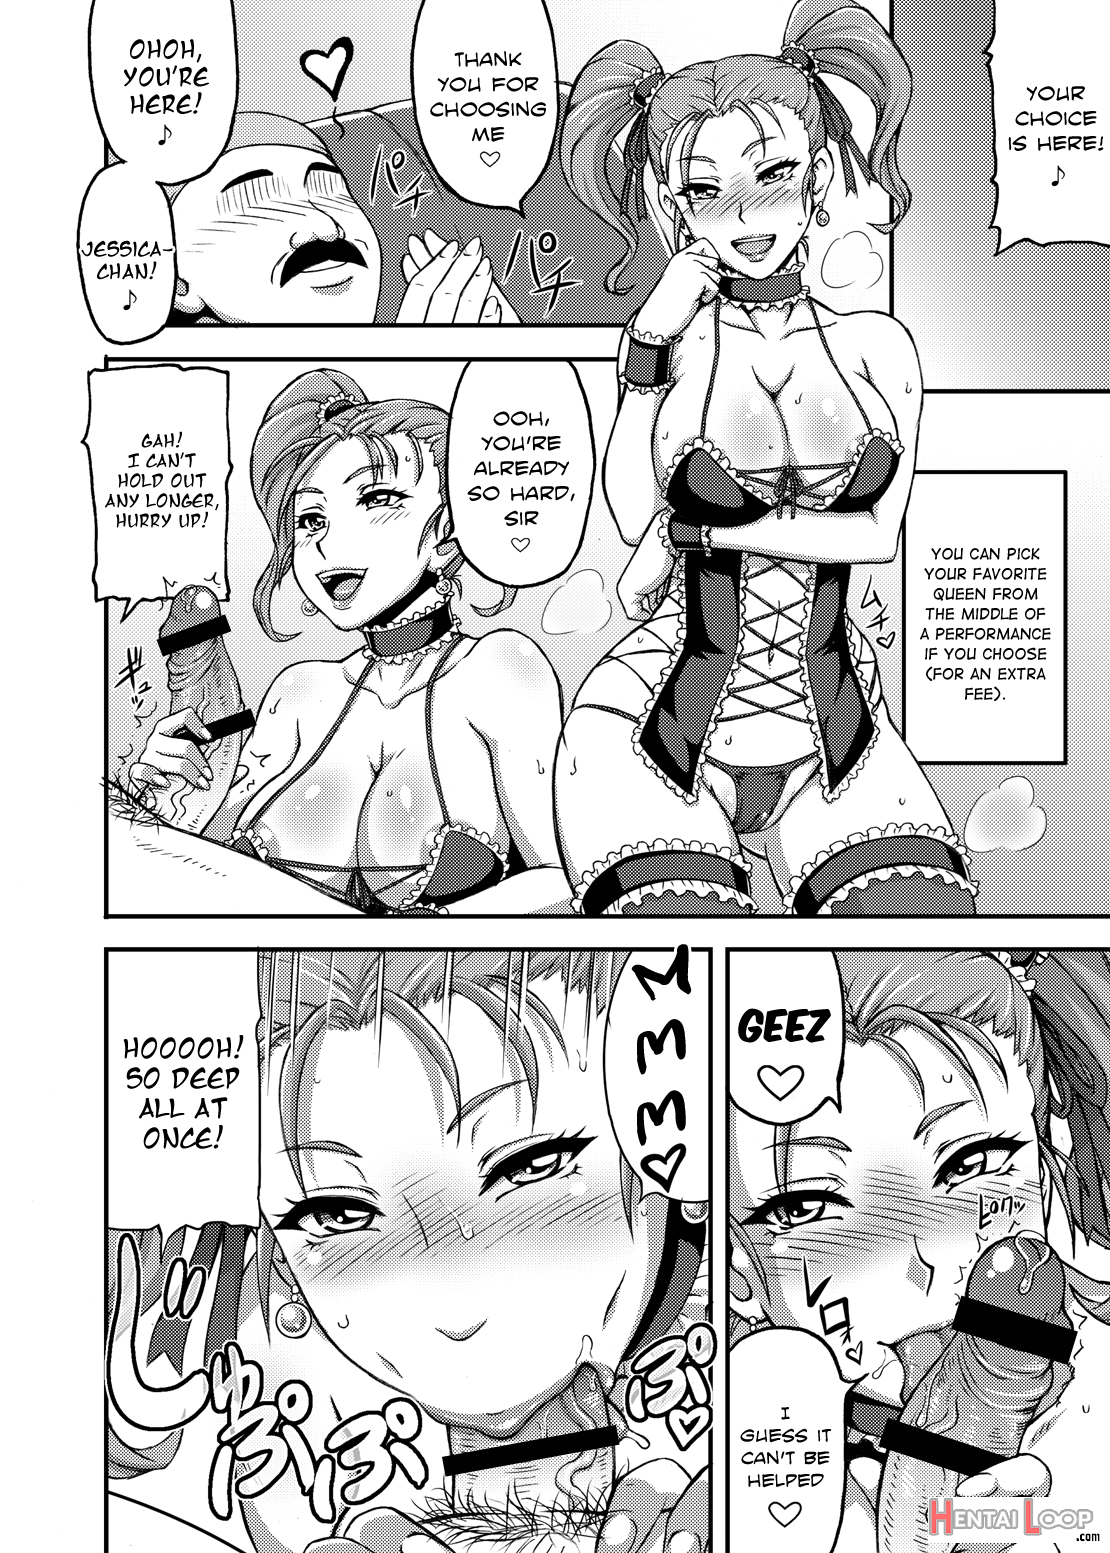 Dragon Queen’s page 7